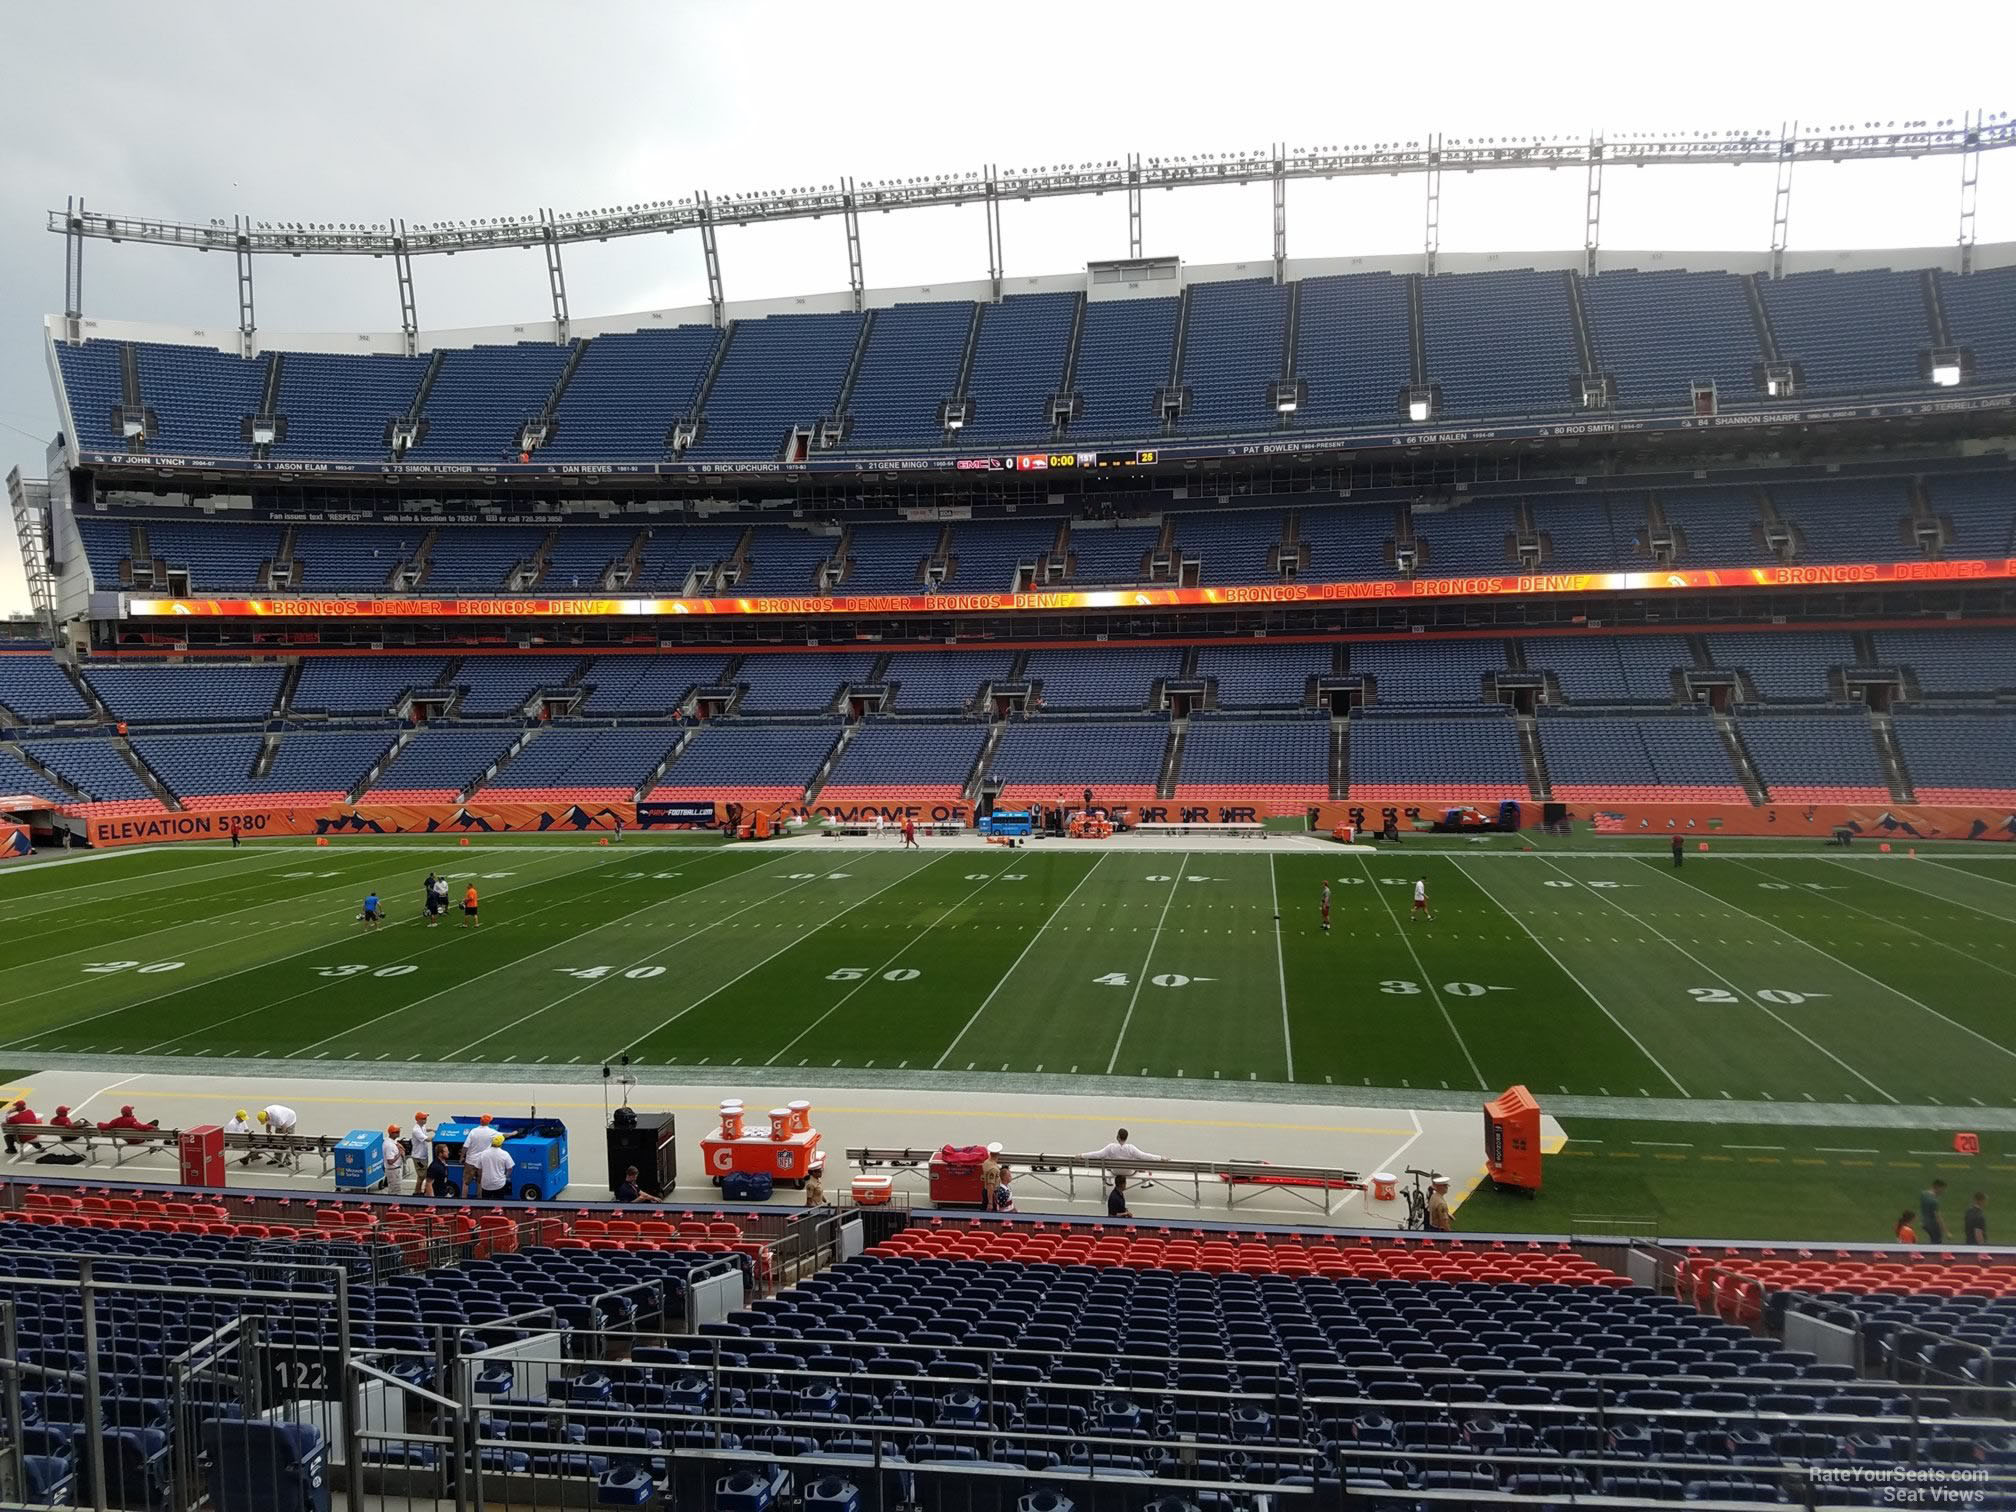 section 122, row 30 seat view  - empower field (at mile high)